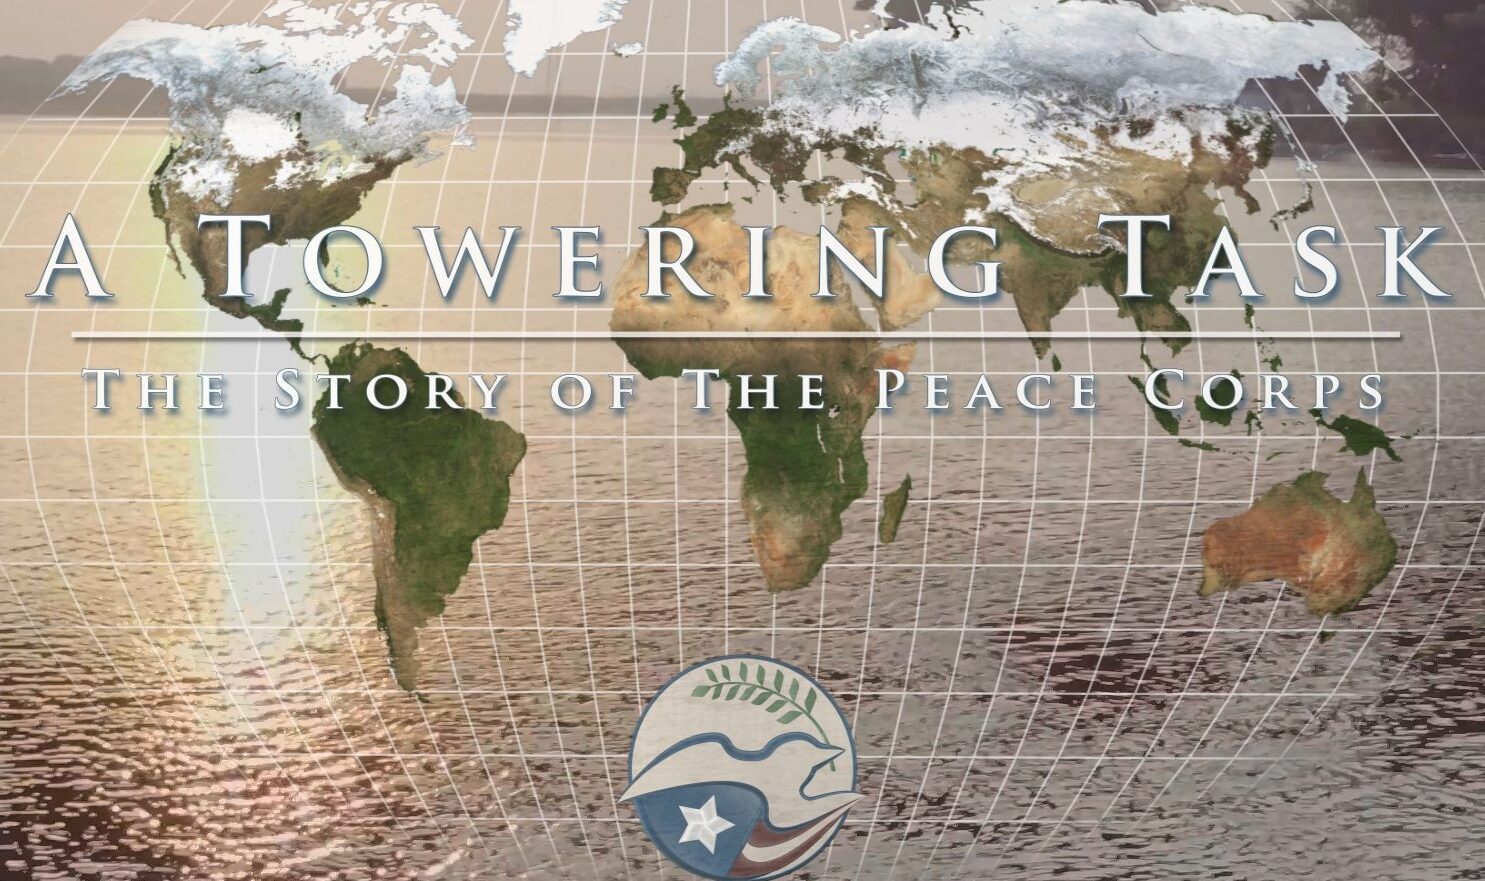 Towering Task: The Story of the Peace Corps